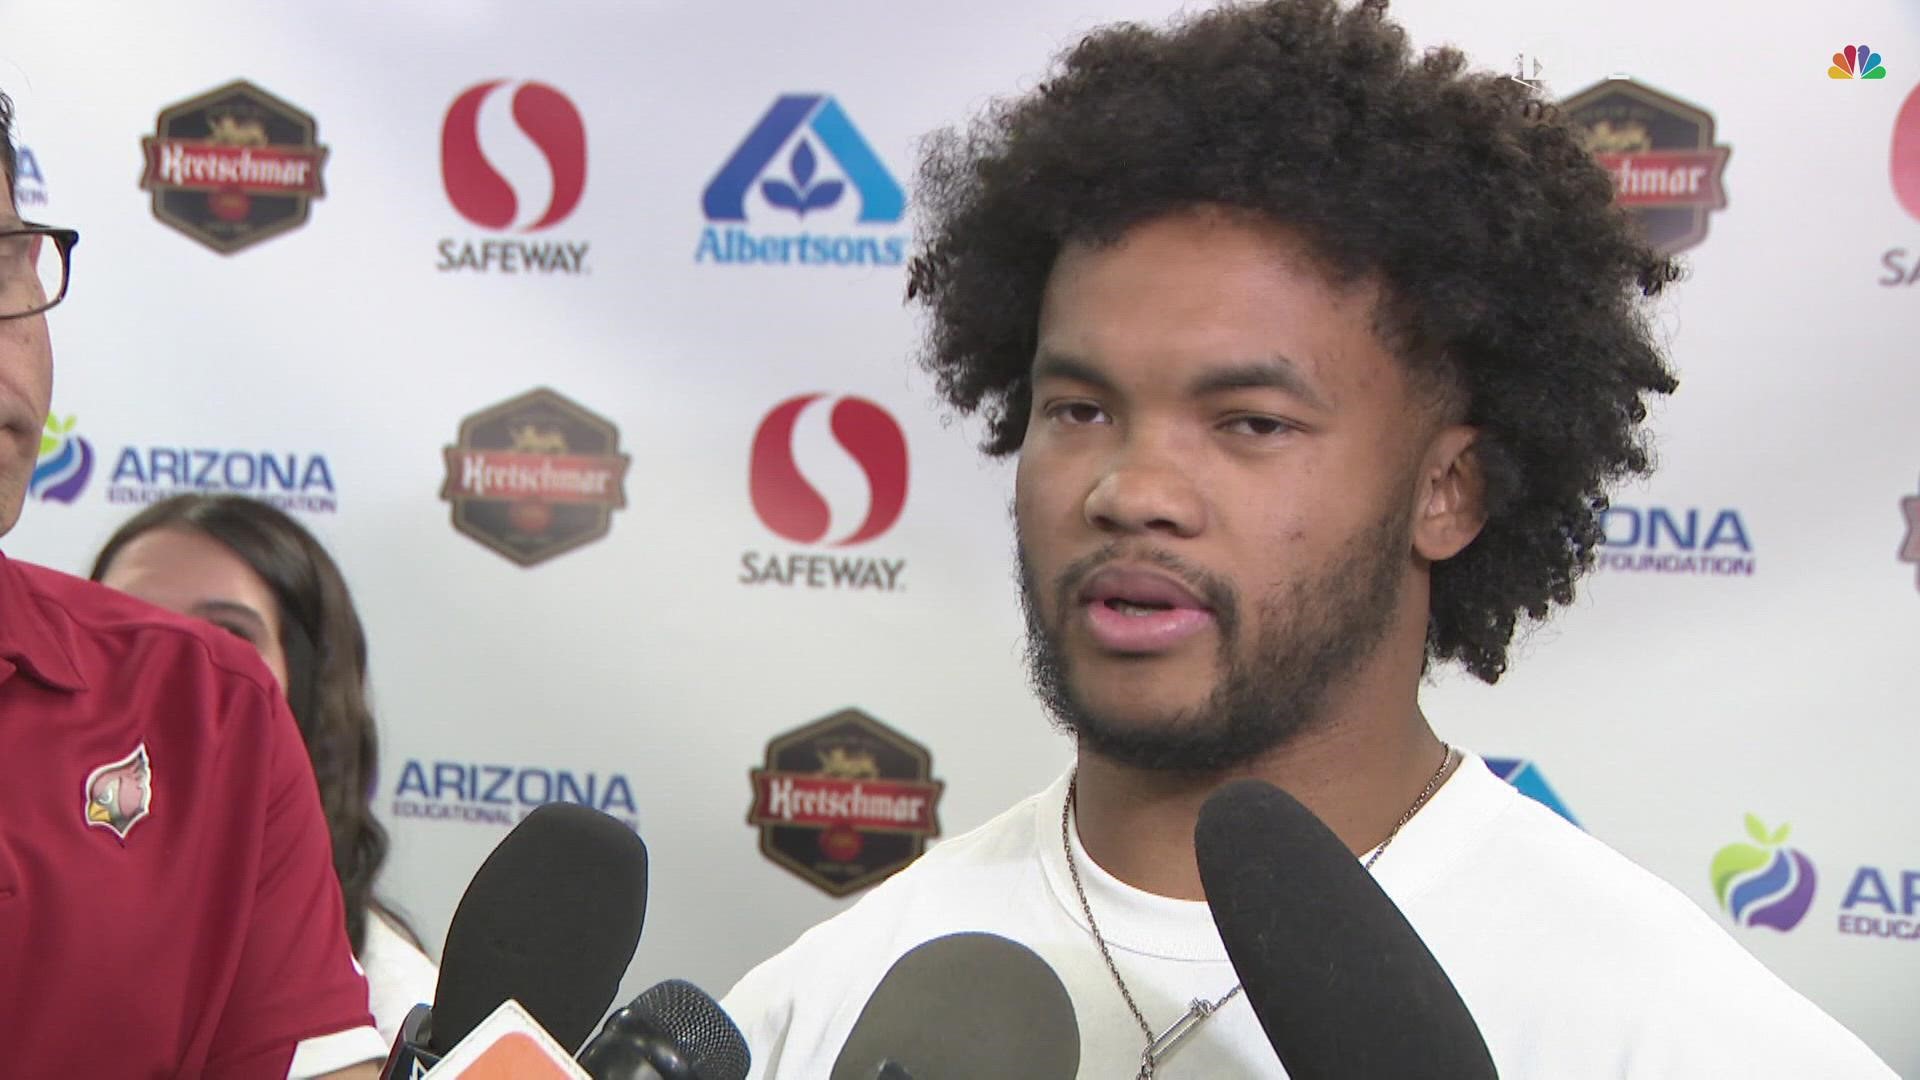 Arizona Cardinals QB Kyler Murray addressed the recent off-season drama, including his social media scrubbing, during a recent appearance in Phoenix.